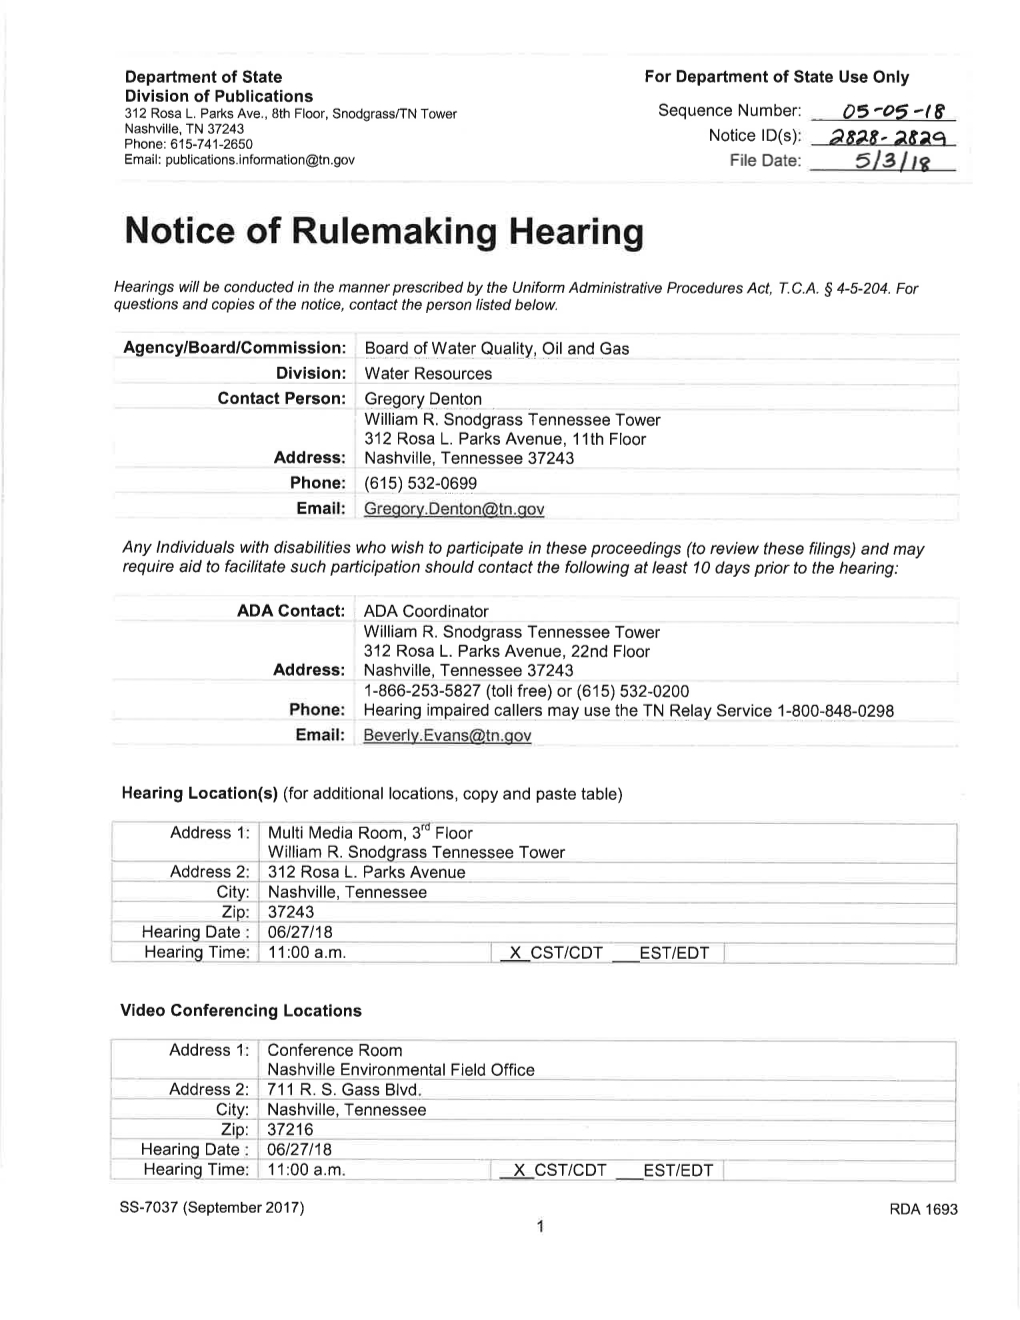 Notice of Rulemaking Hearing